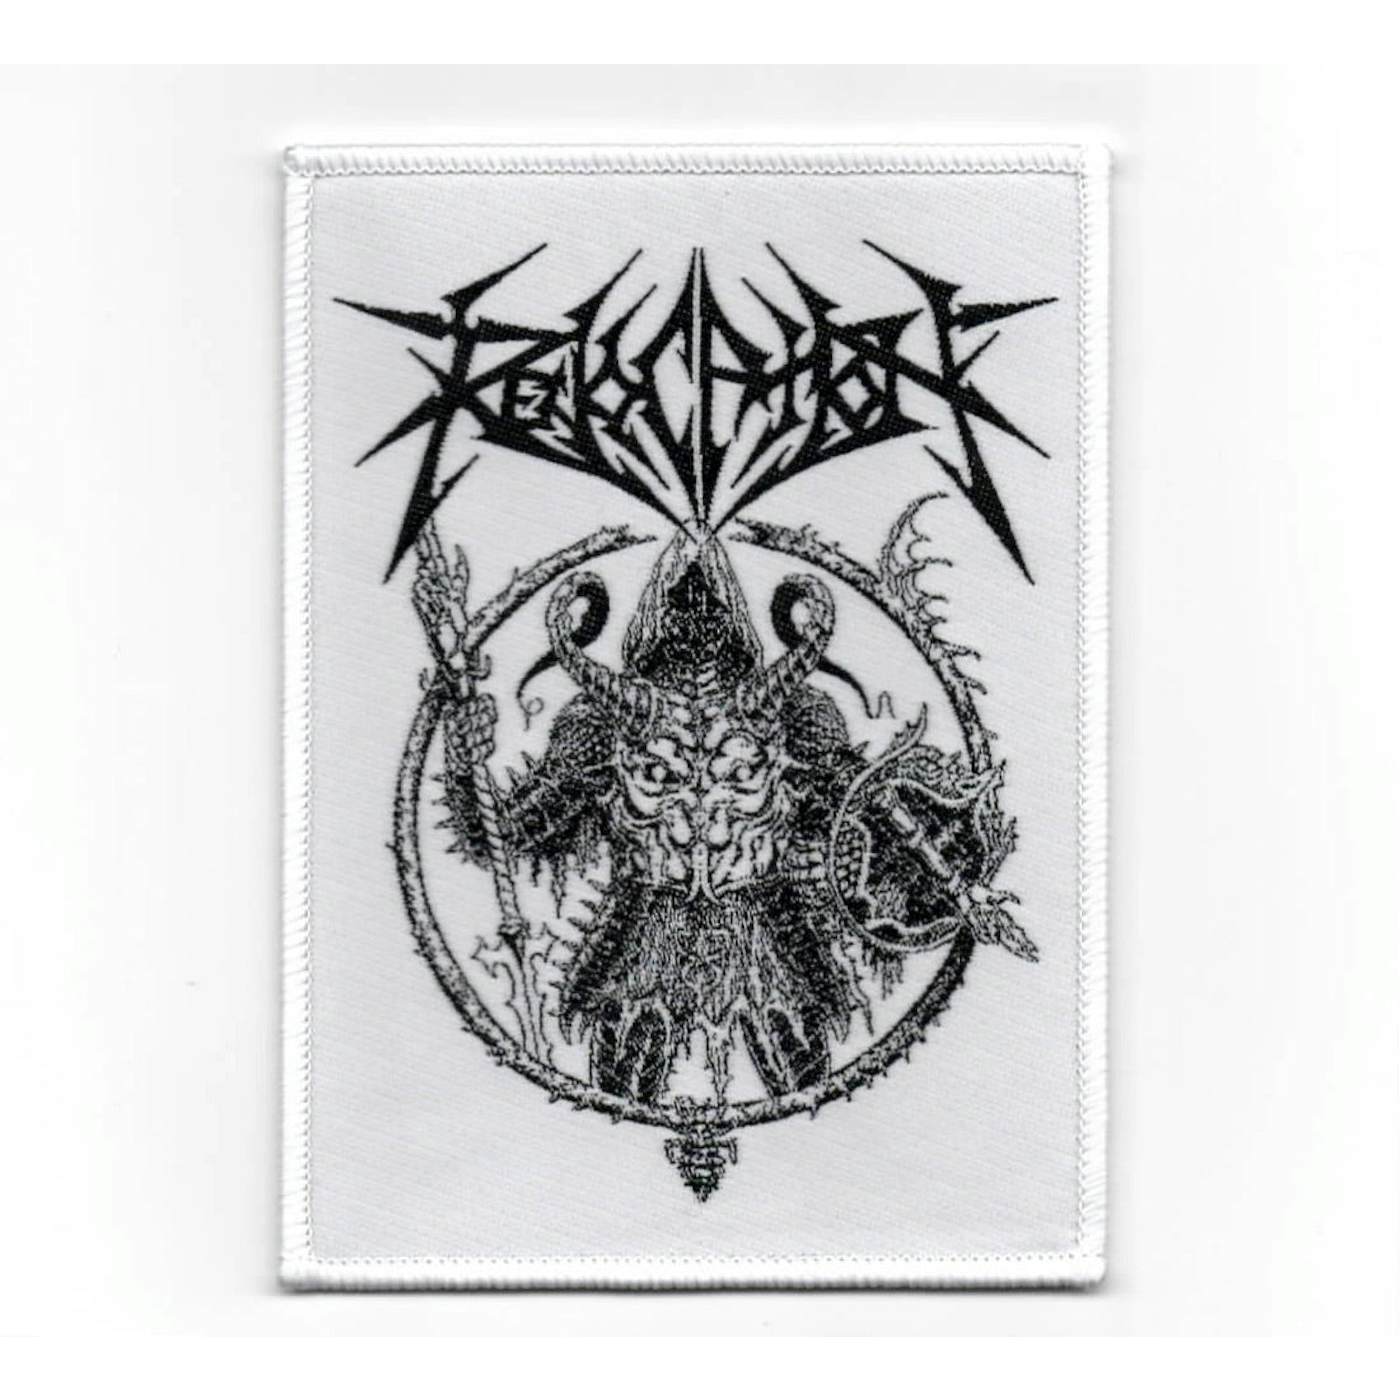  Revocation "Champion of Hell" Patch